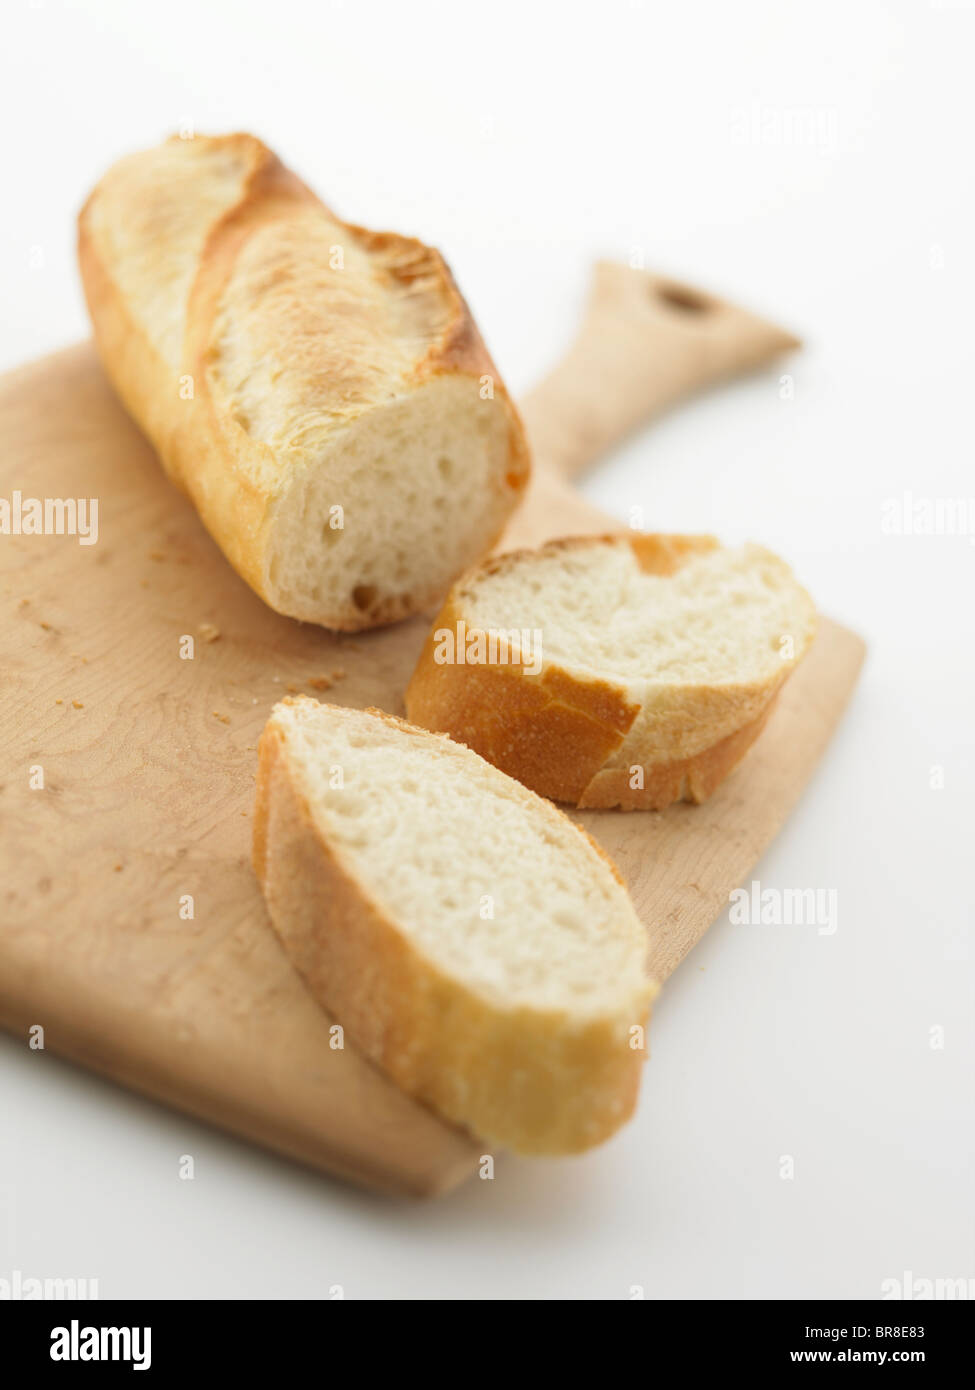 Baguette on cutting board Banque D'Images